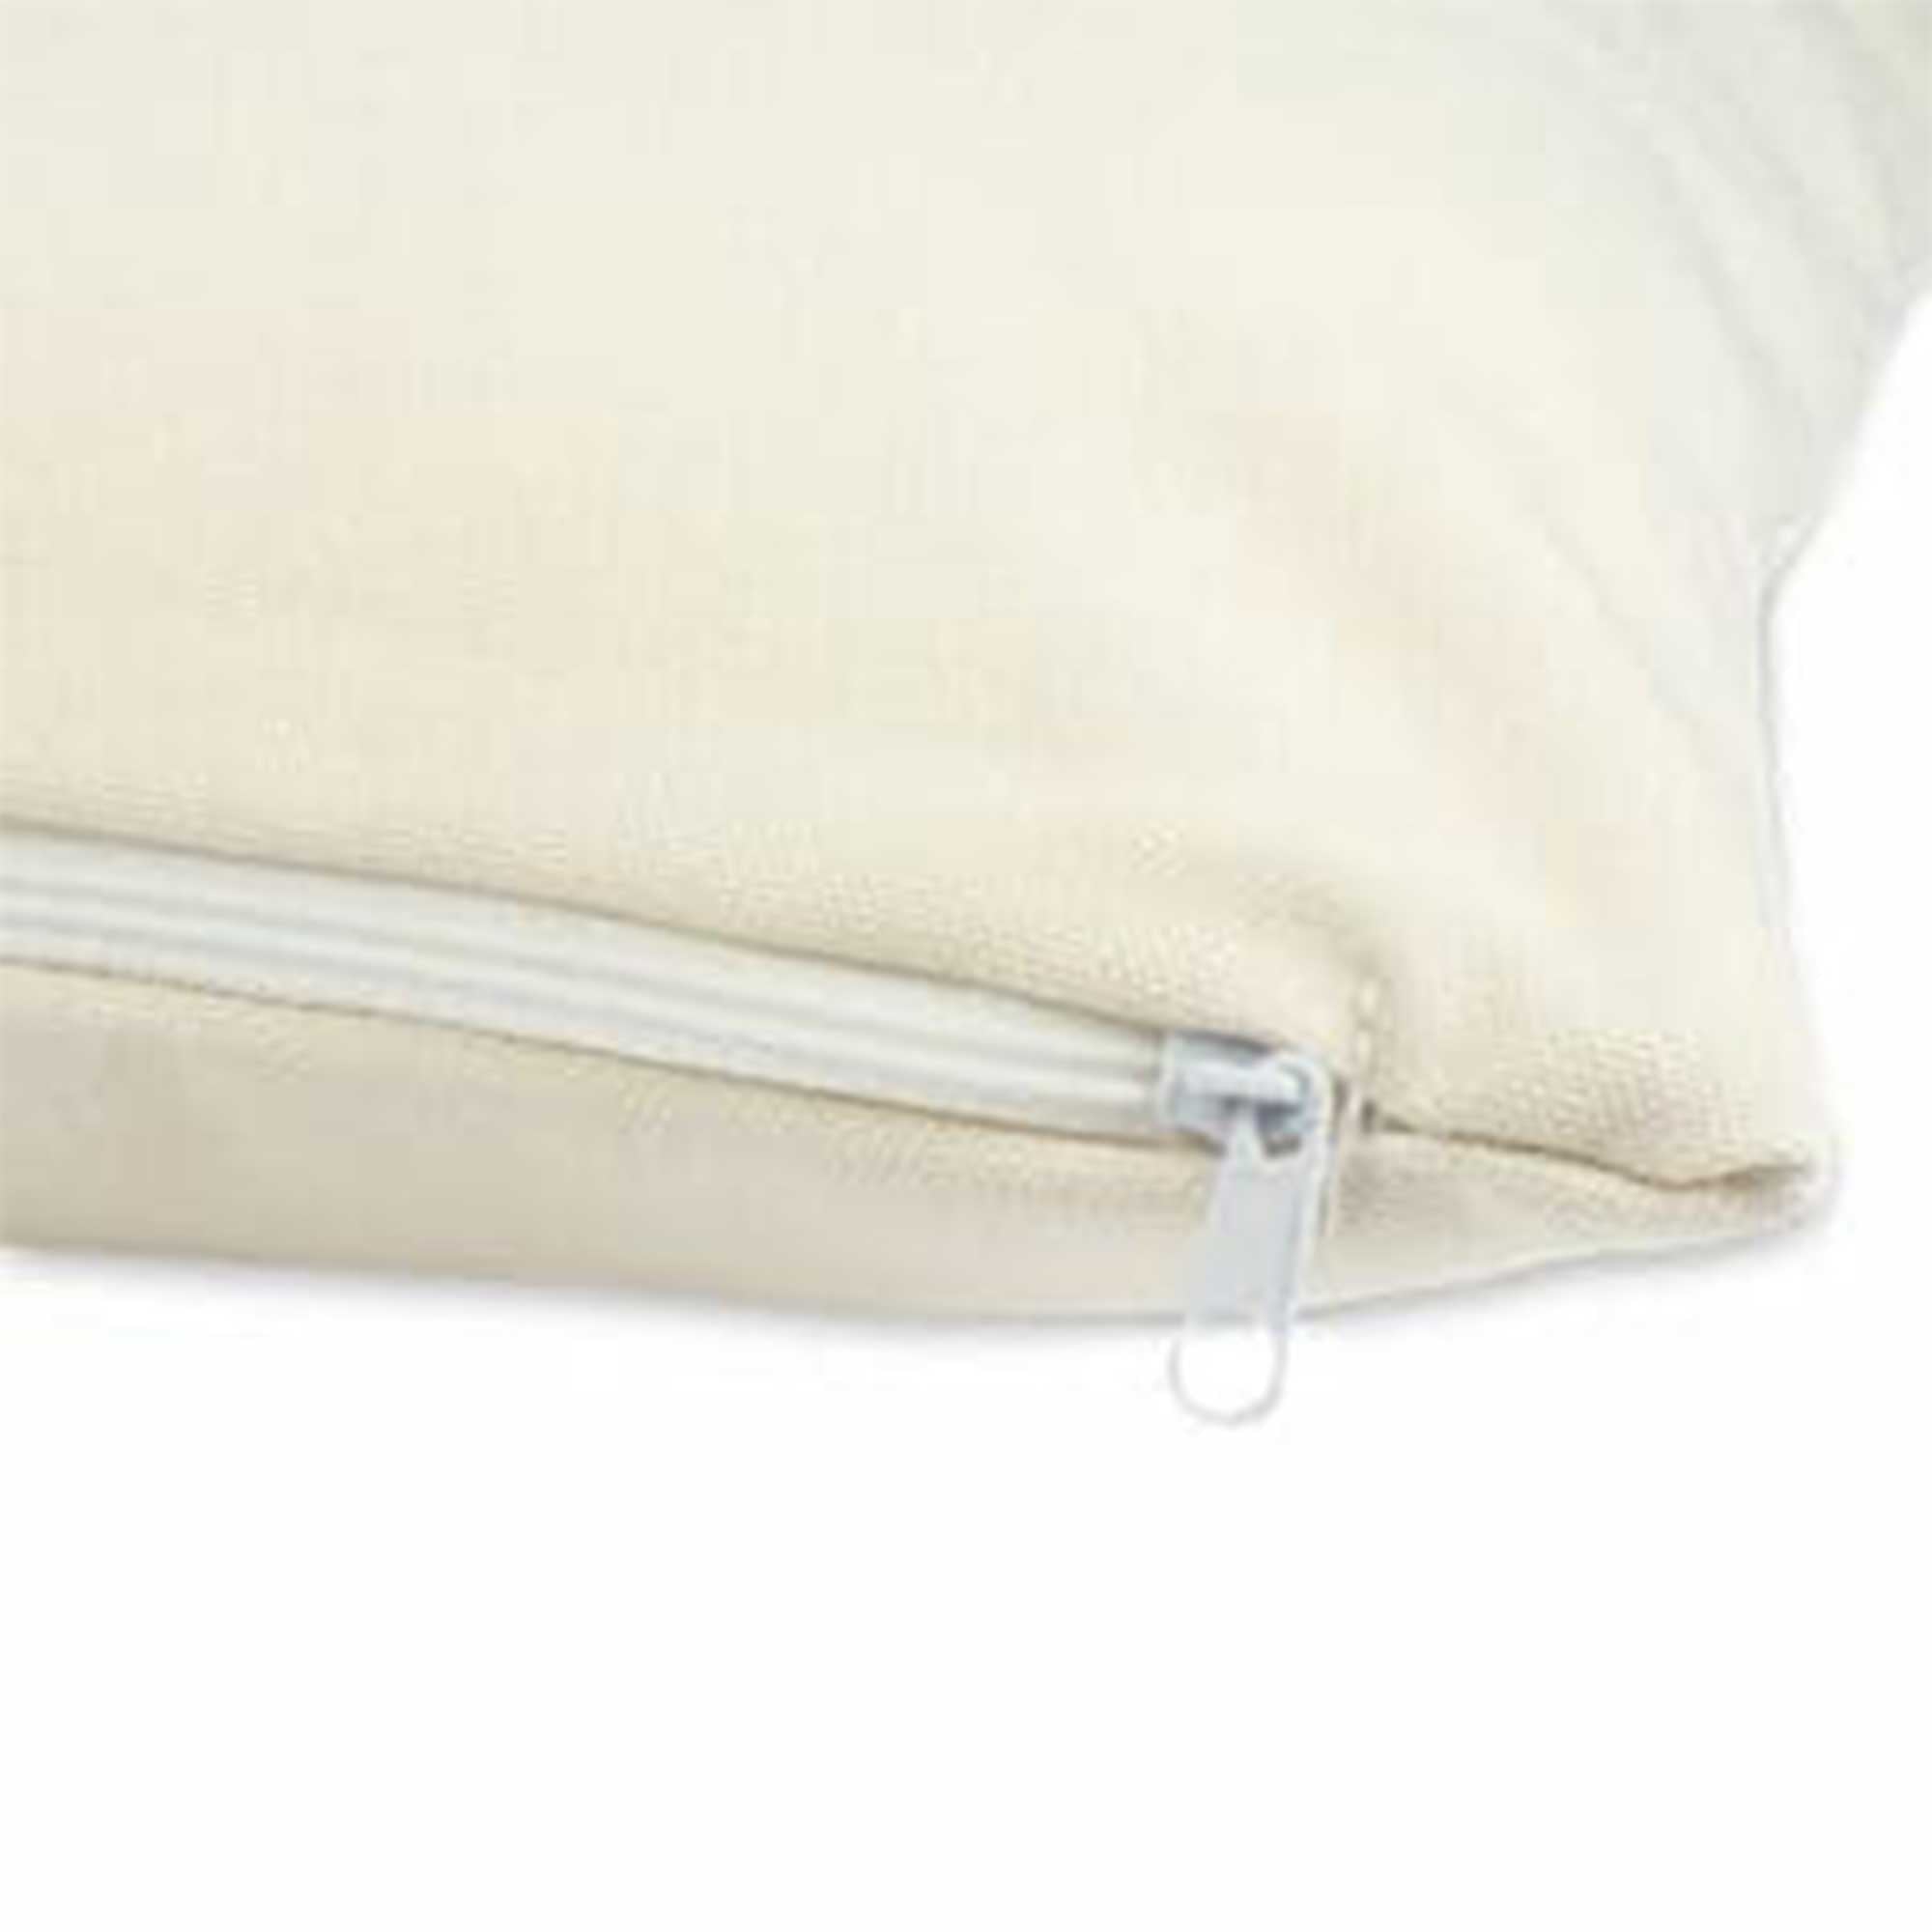 Camping pillow “Time out”